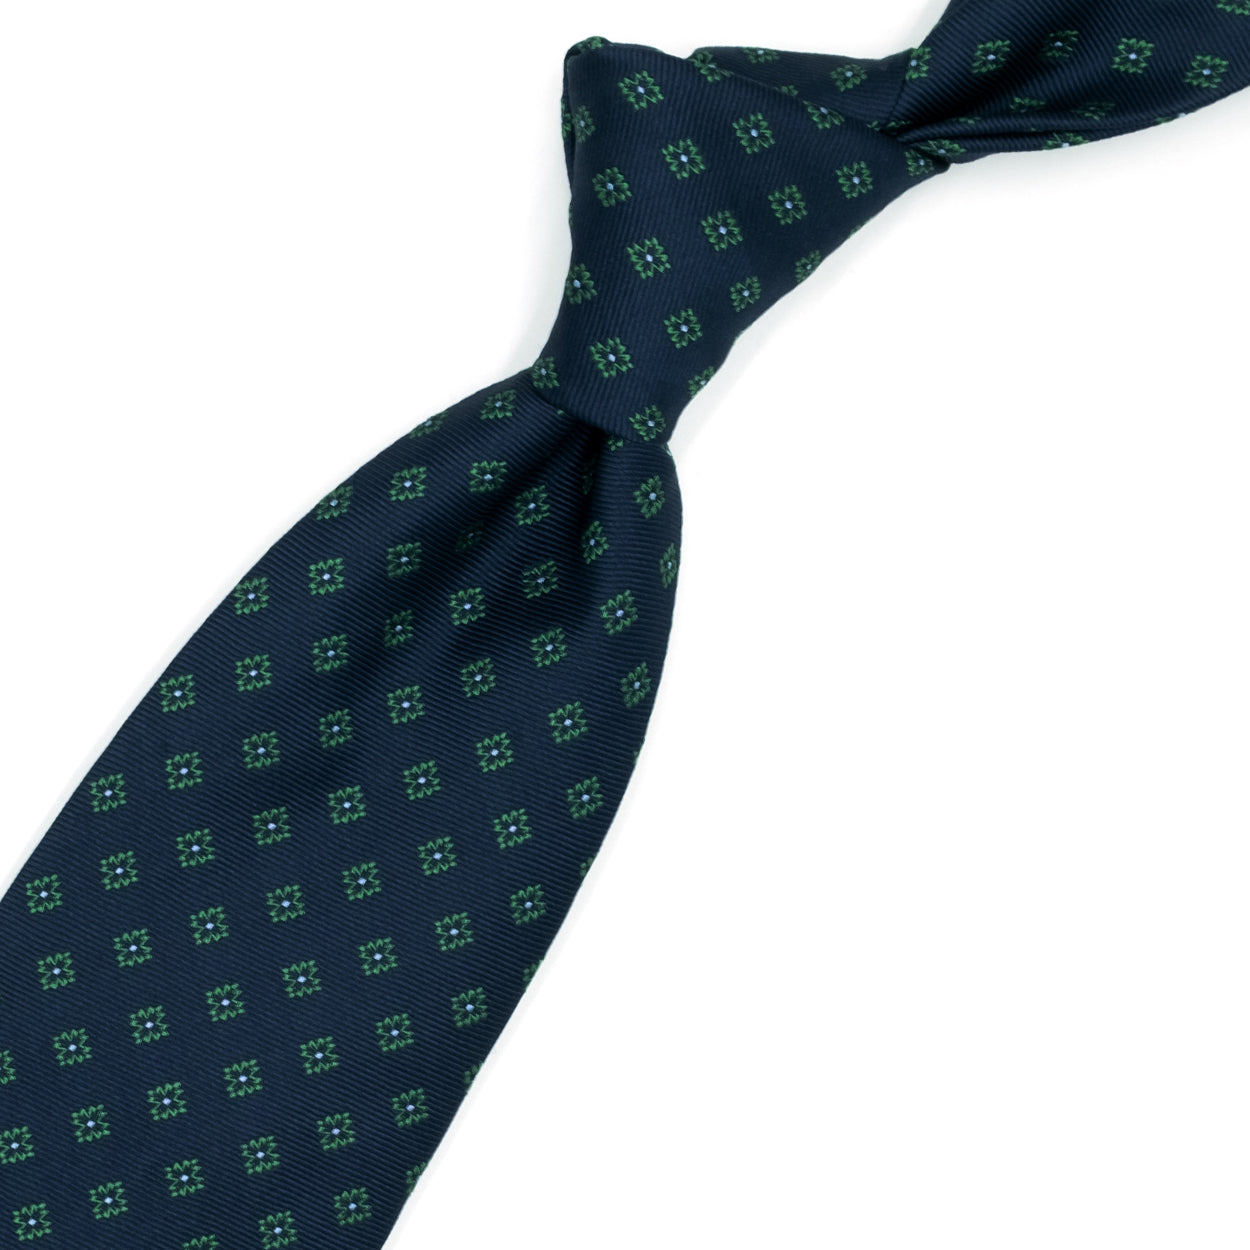 Blue tie with green flowers and blue dots